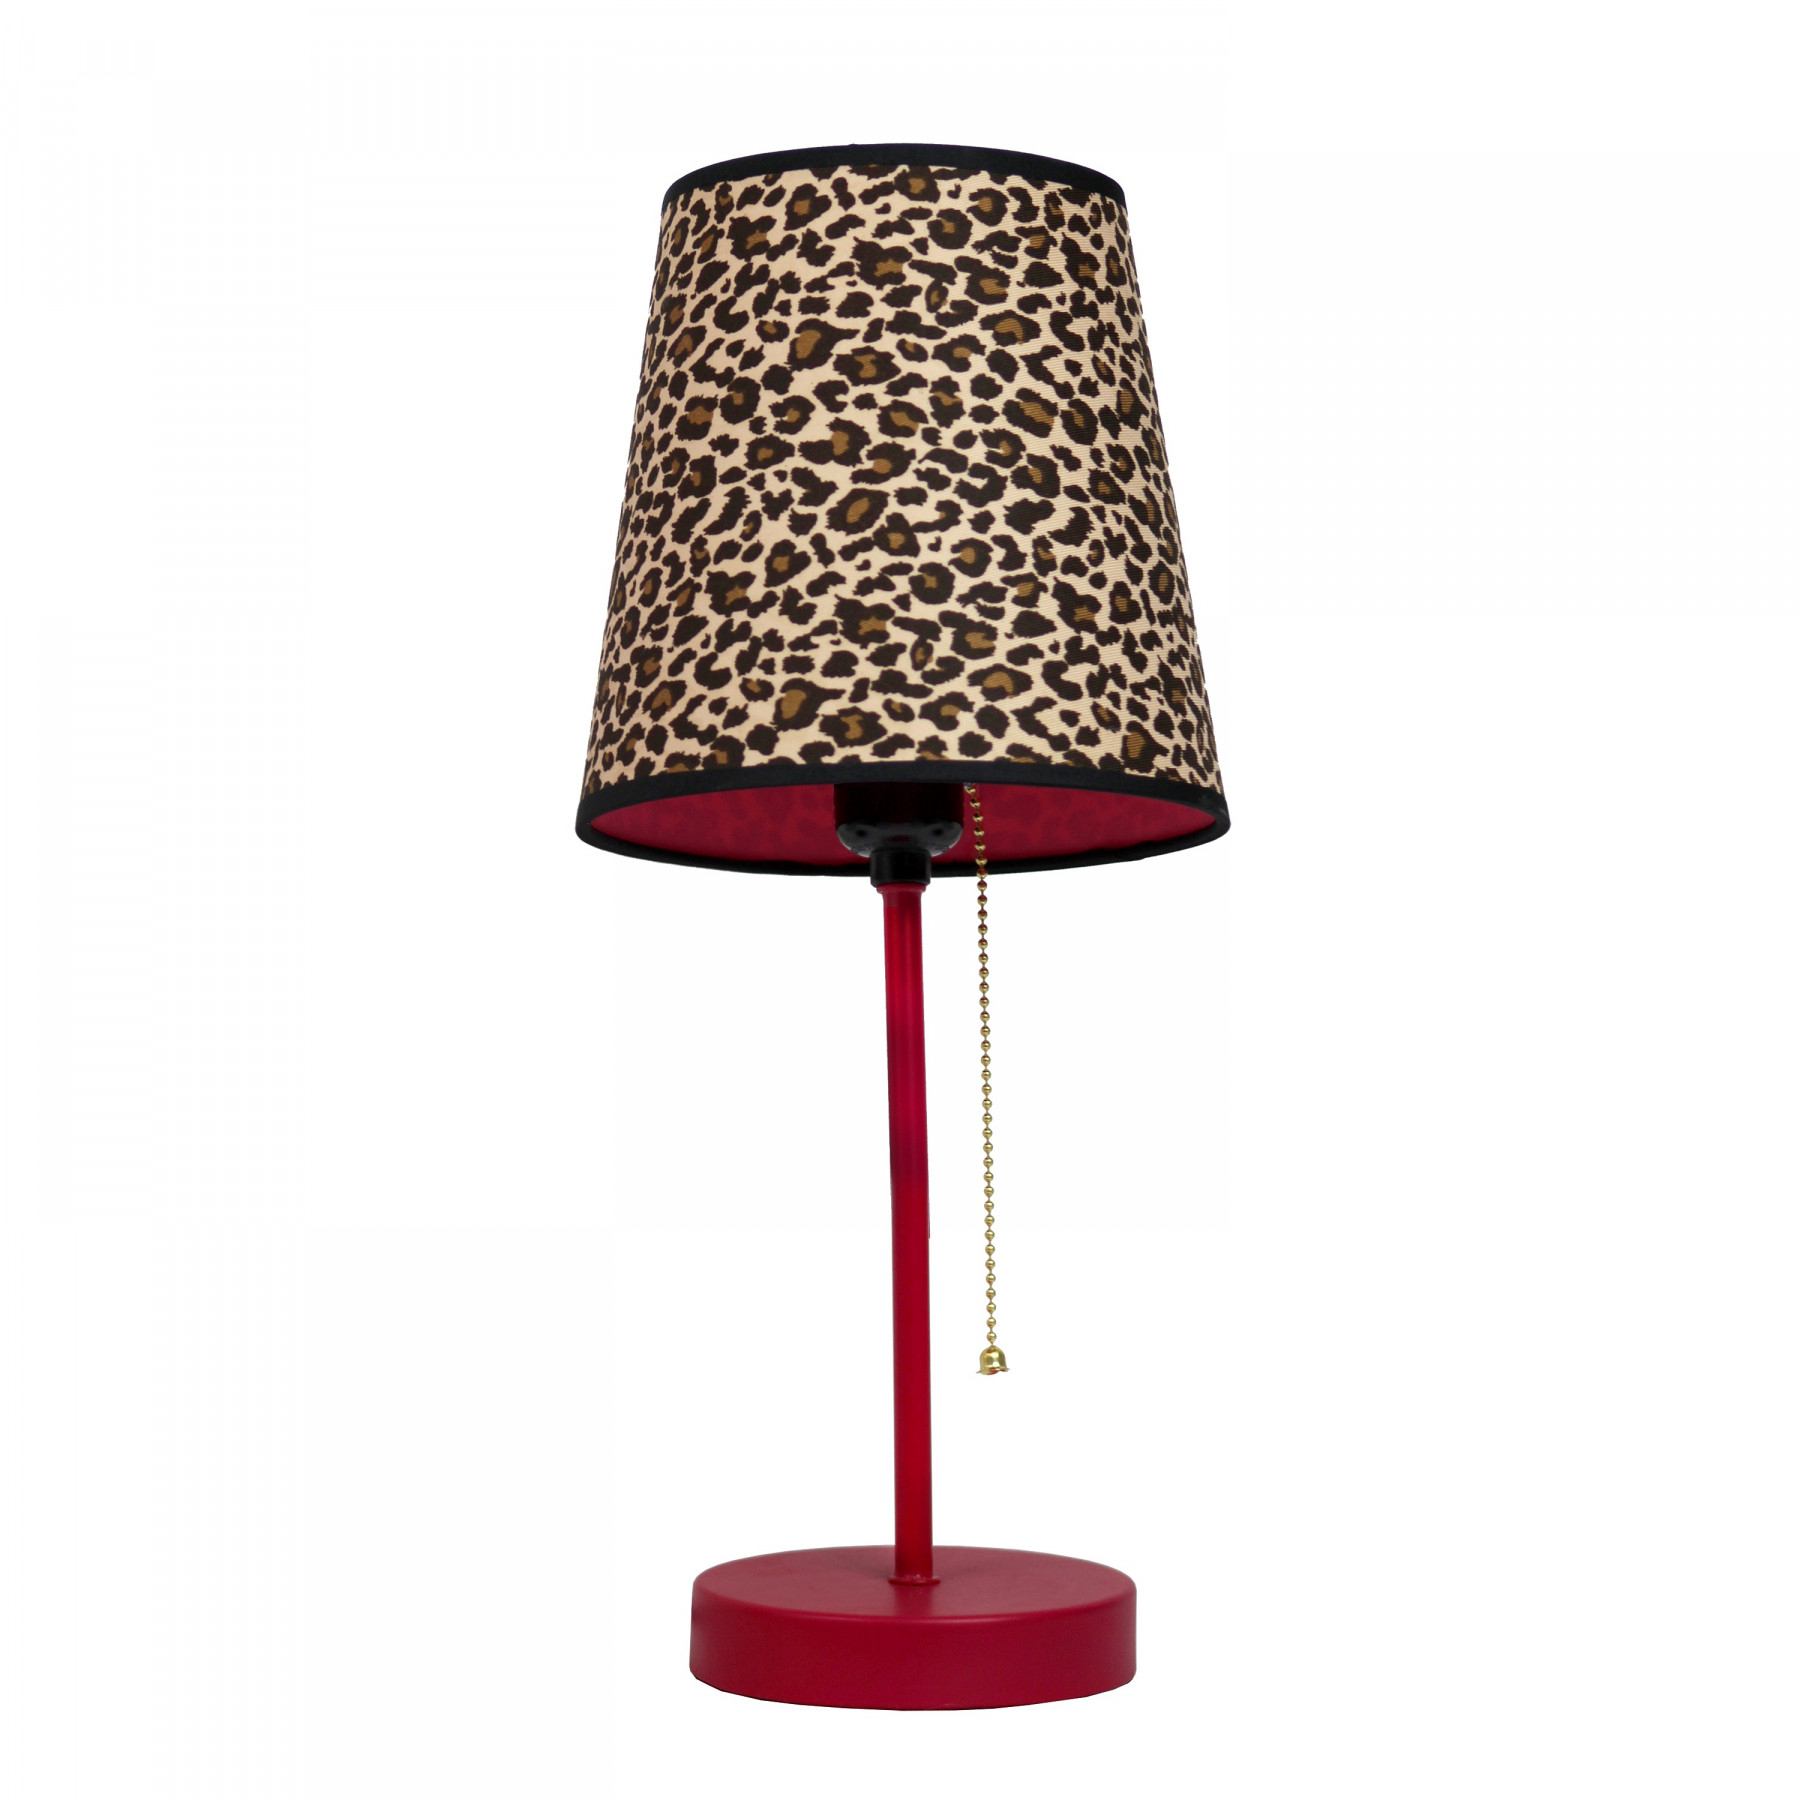 Fun Prints 15" H Table Lamp with Empire Shade